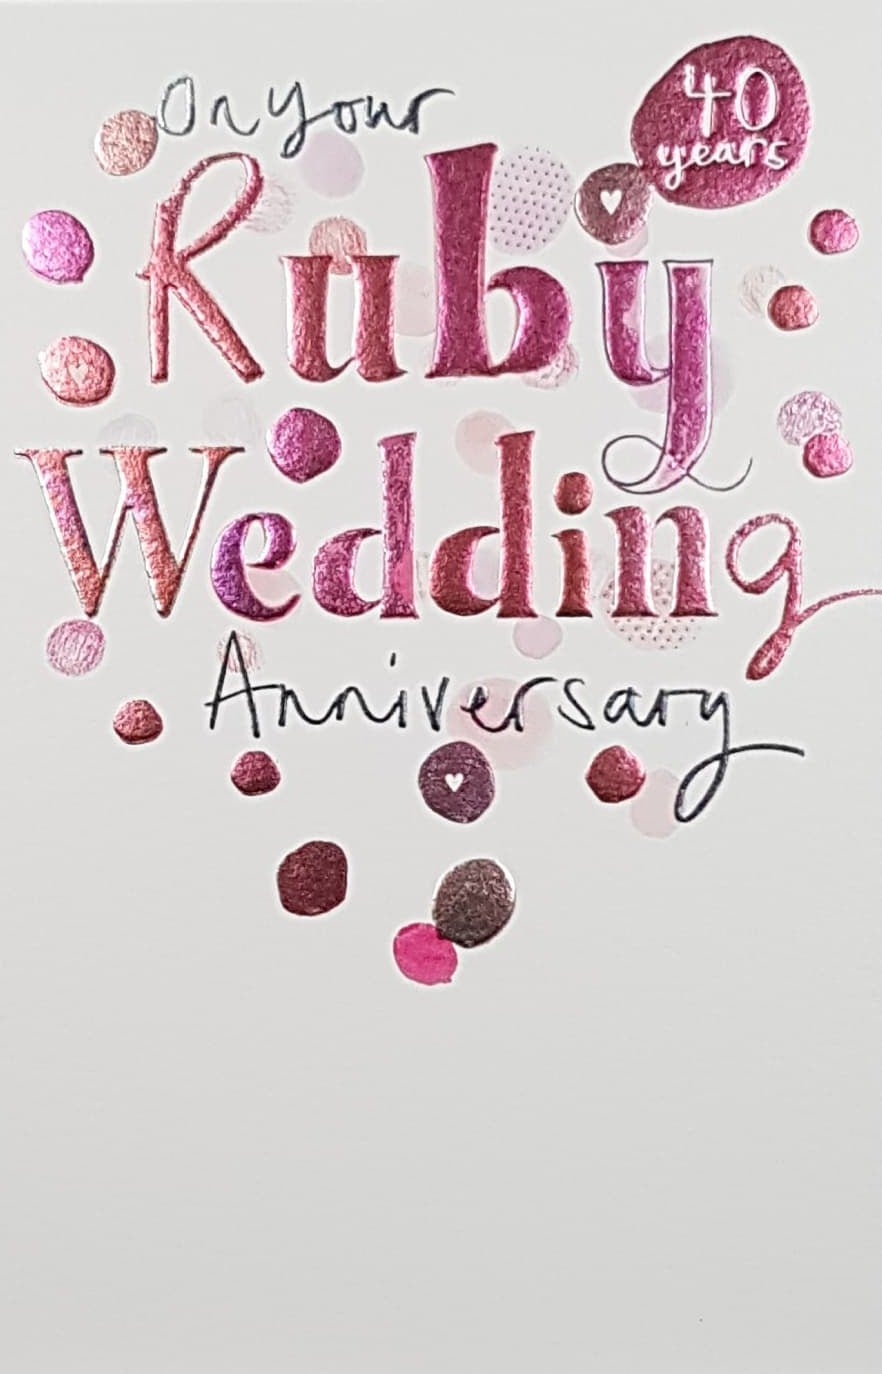 Anniversary Card - 40th Anniversary / Pink & Red Artistic Blobs